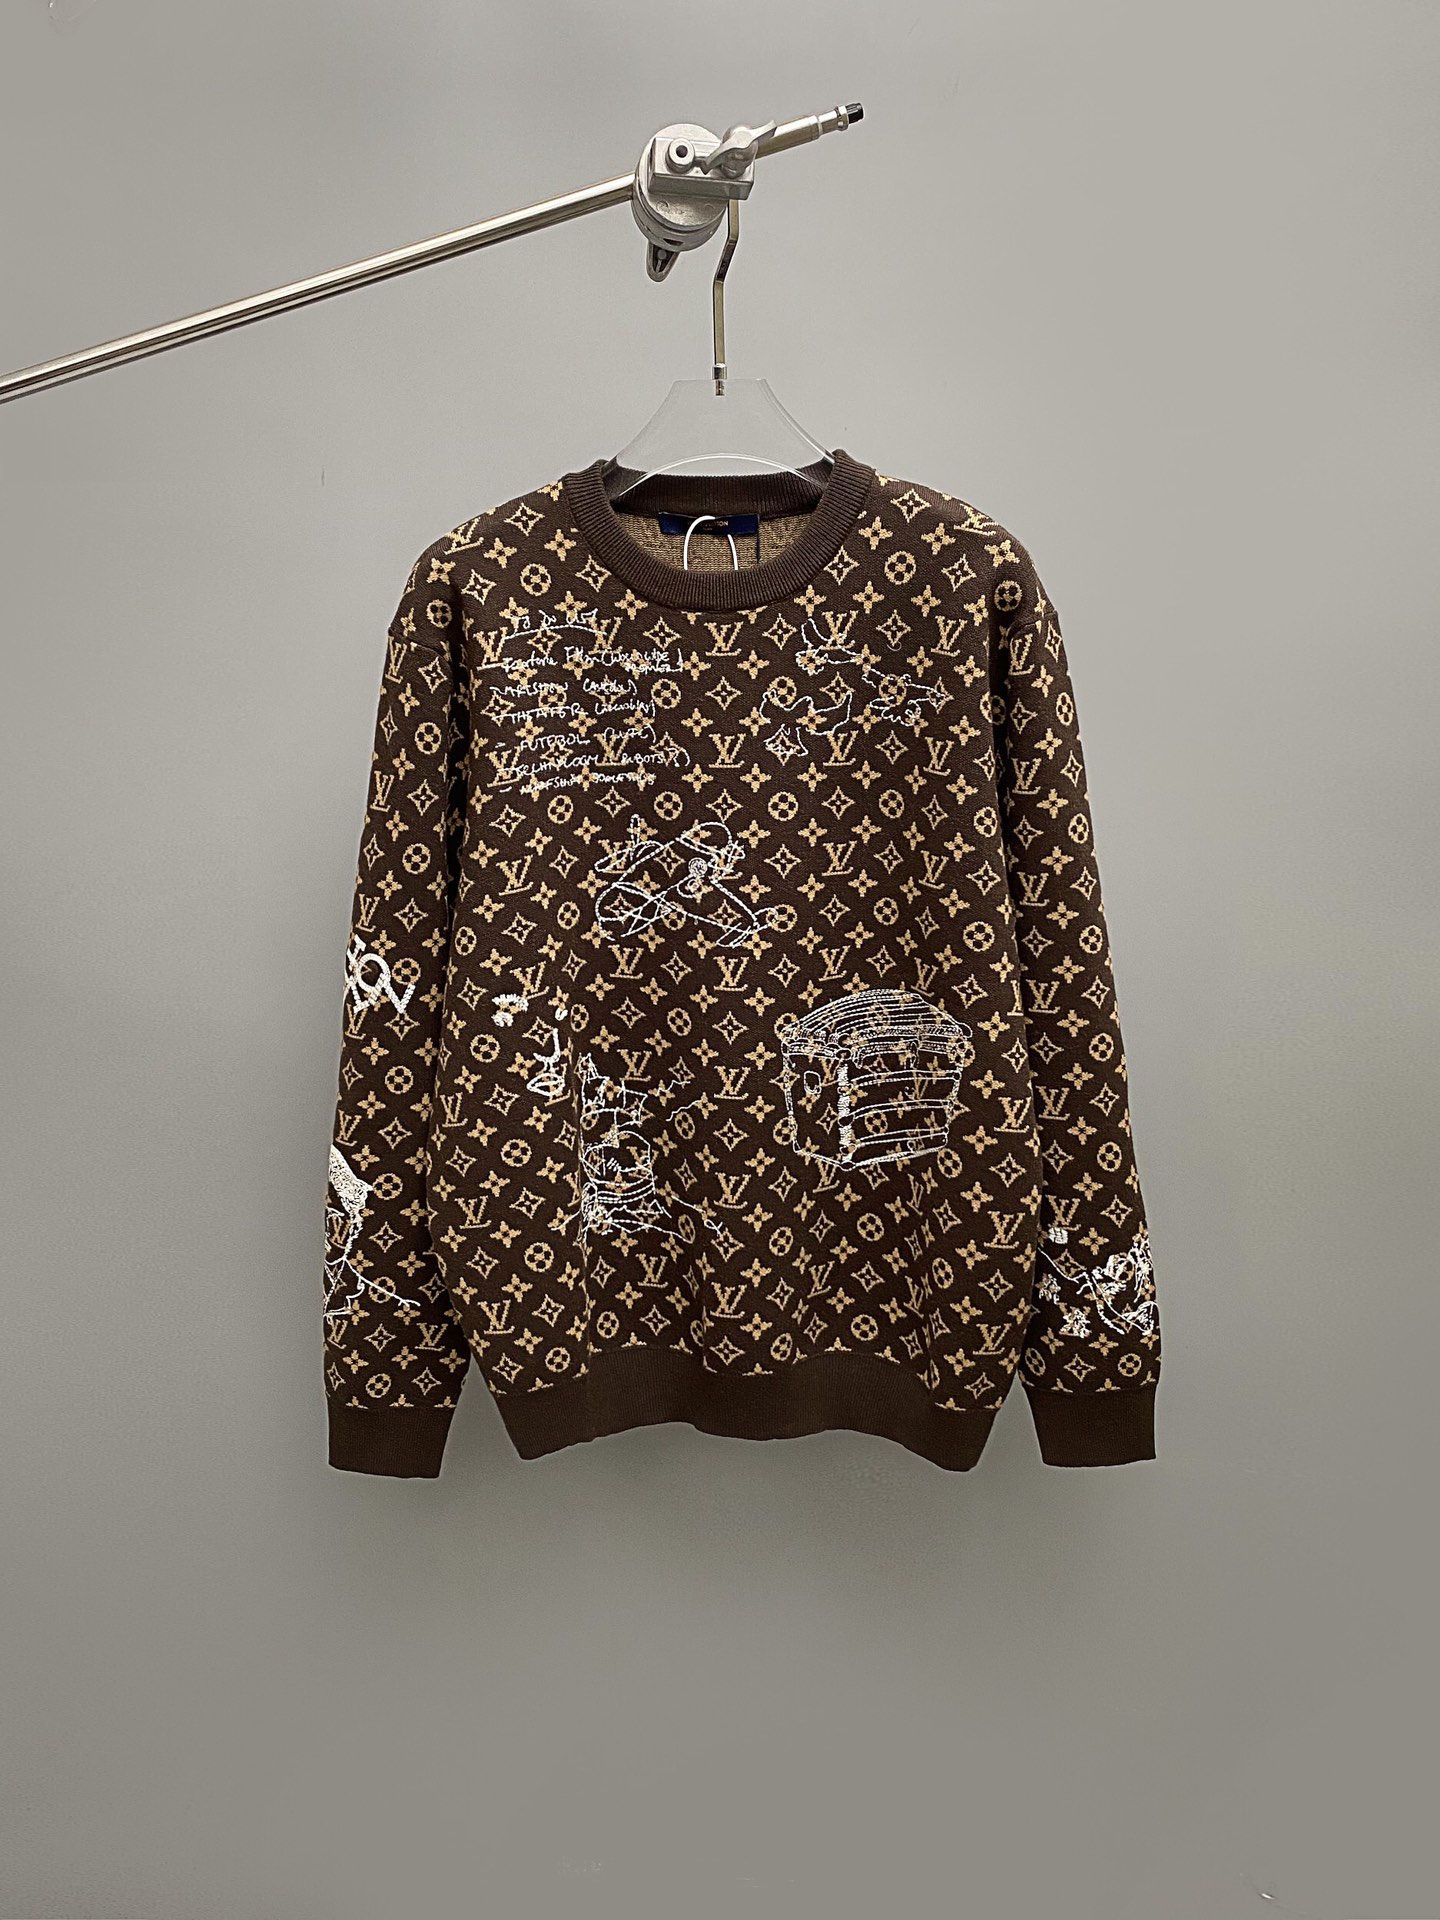 Louis Vuitton mirror quality
 Clothing Knit Sweater Sweatshirts Luxury Cheap
 Embroidery Knitting Wool Fall/Winter Collection